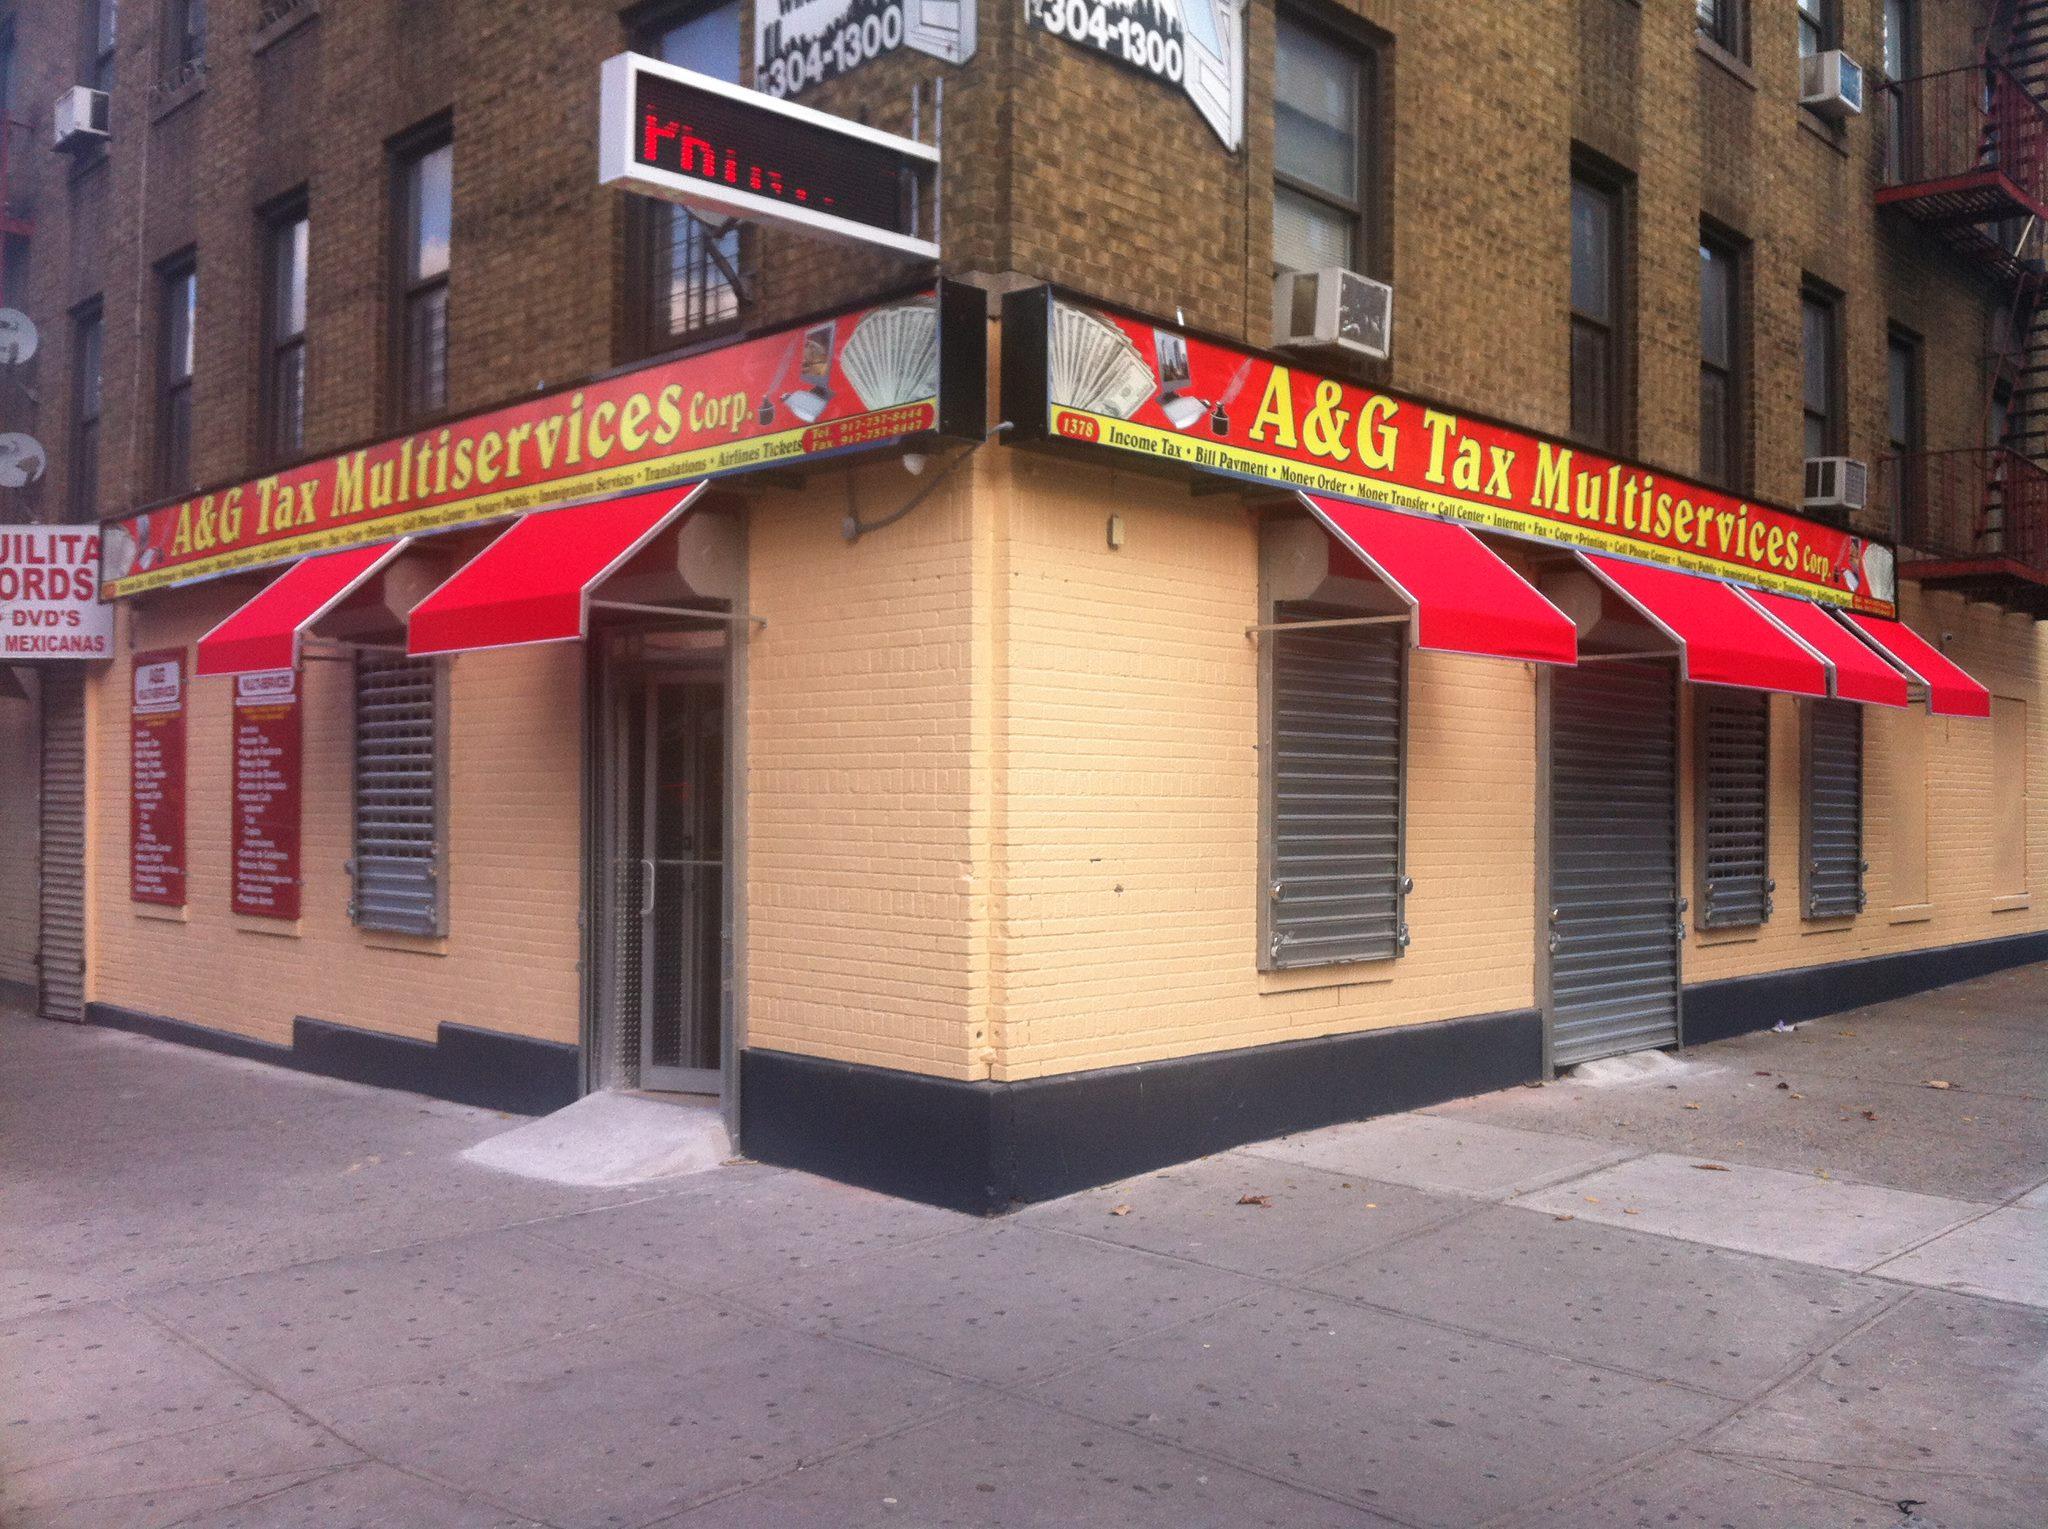 Come en visit our place. The most complete multiservice in the Bronx area. 